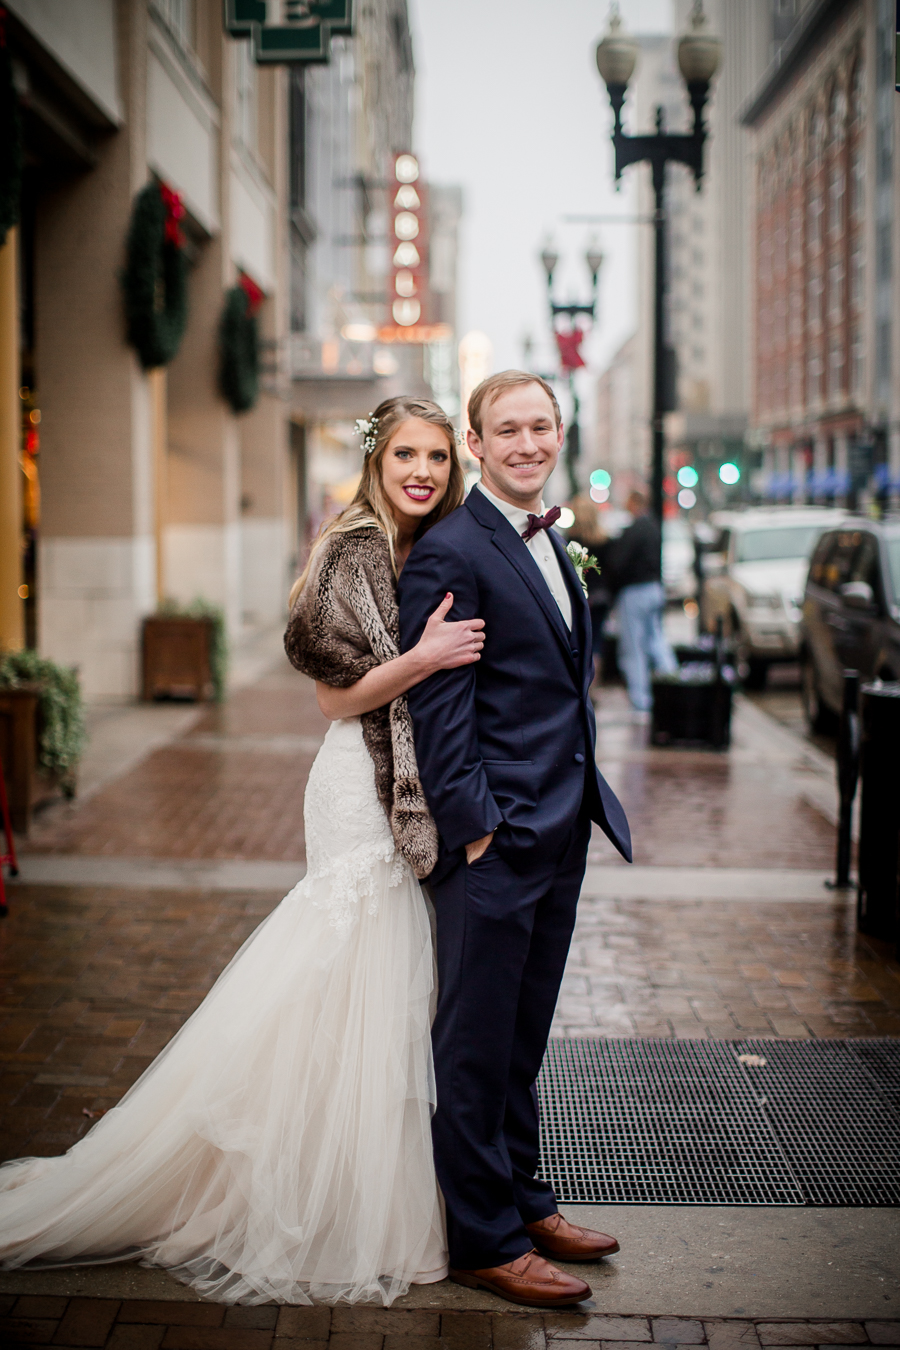 Looking at the camera while the bride hugs the groom from behind during the bride and groom romantic portraits at this winter wedding at Knoxville Wedding Venue, Jackson Terminal, by Knoxville Wedding Photographer, Amanda May Photos.